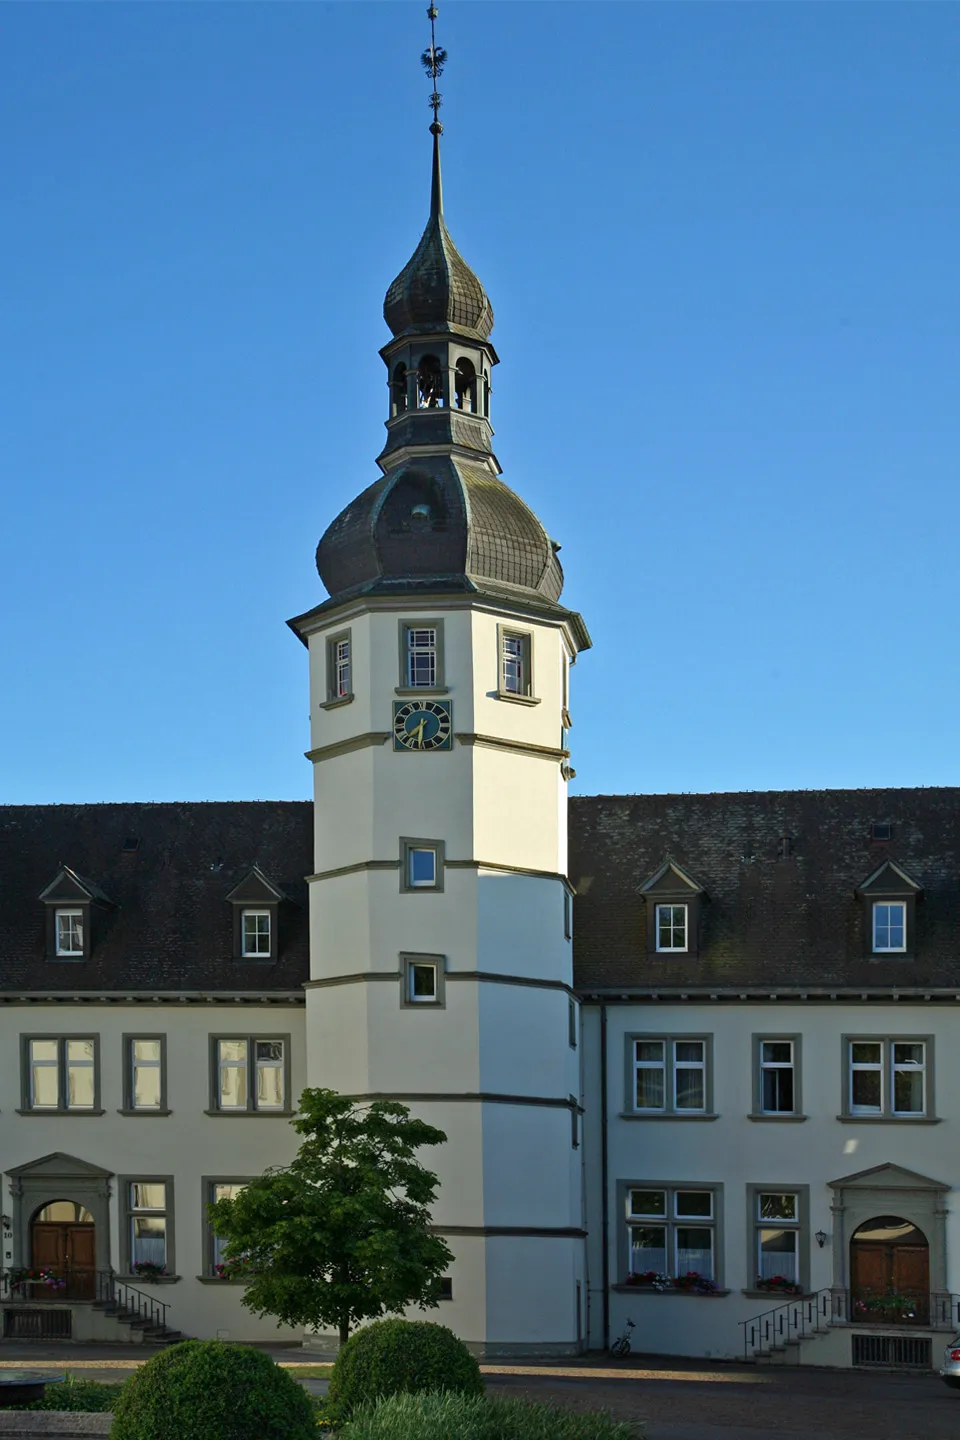 Photo showing: The monastery Hegne (Barmherzigen Schwestern vom heiligen Kreuz) is located in a district of the municipality Allensbach at Lake Constance, Germany. The monastic buildings are also used for school and charitable institutions.